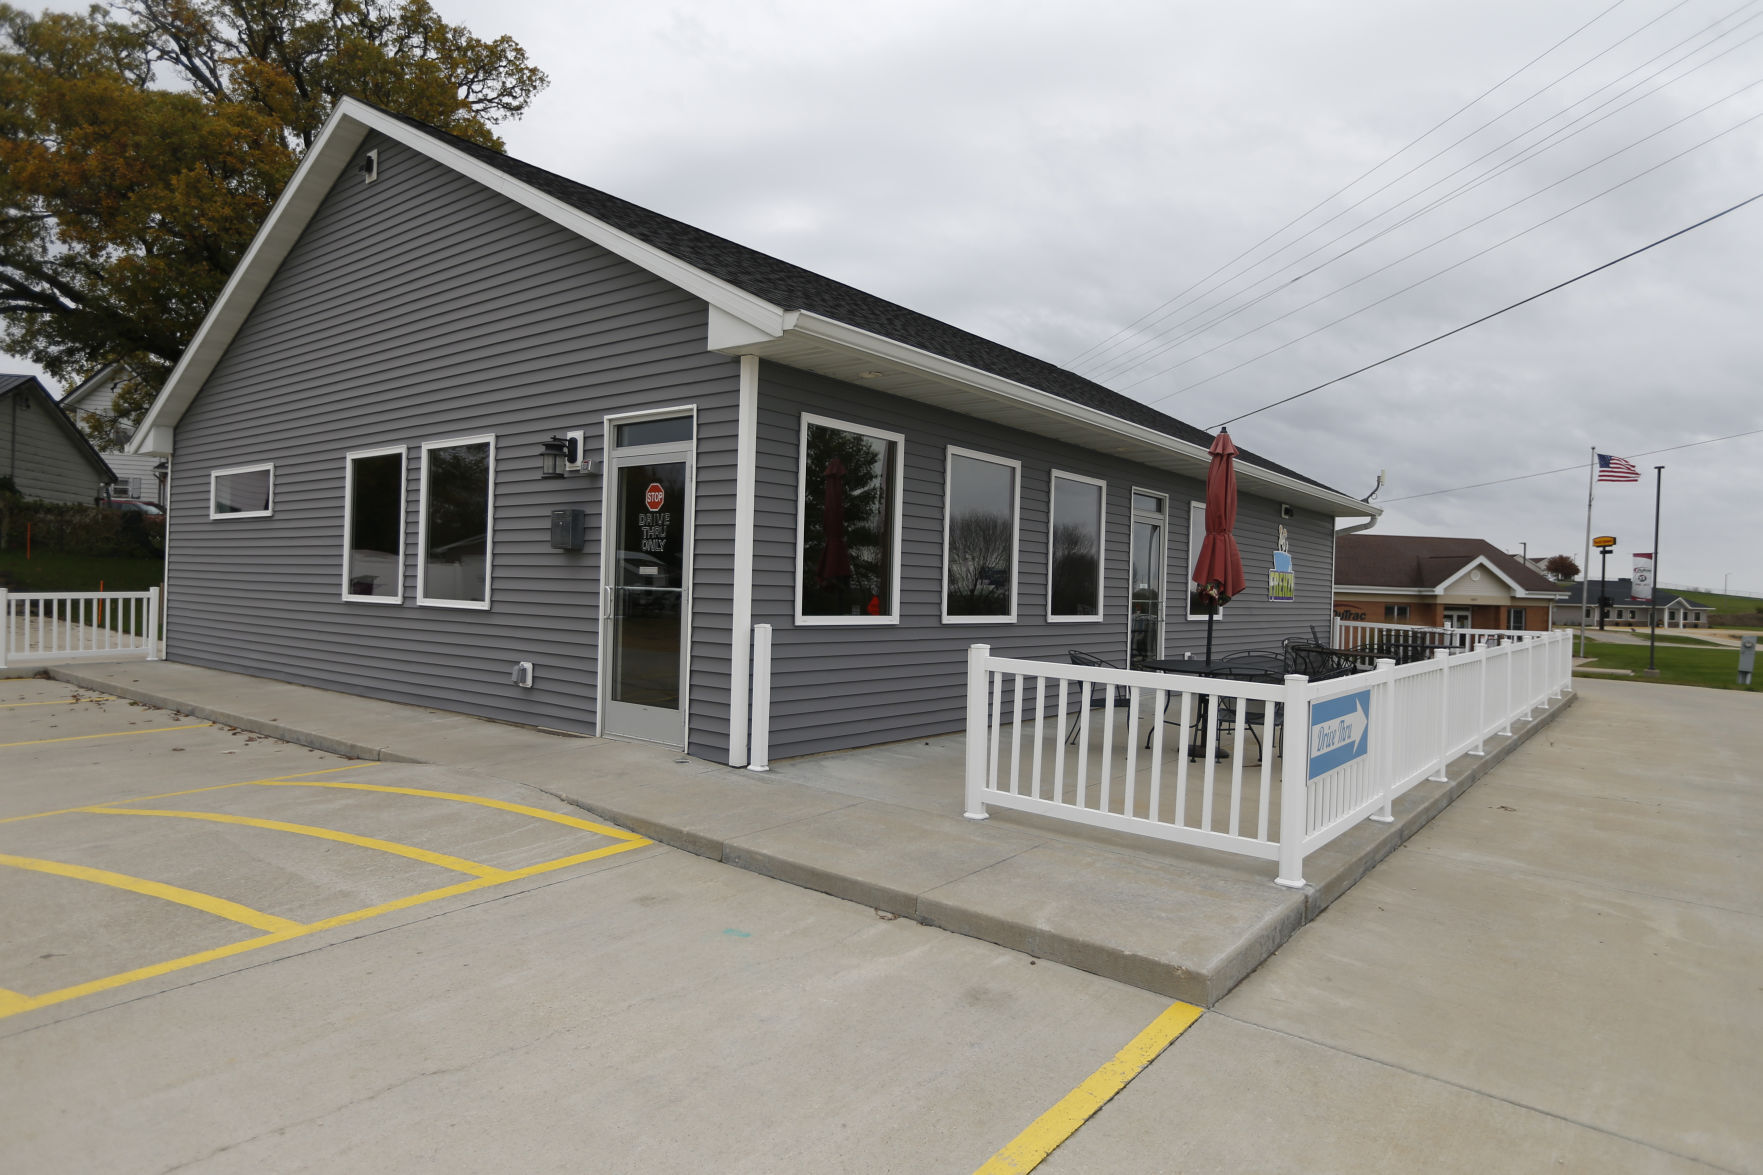 Frenzi Coffee in Maquoketa, Iowa, plans to close this month to make room for a local meat processing company, TADA Meats, which plans to open there in early 2022.    PHOTO CREDIT: Dave Kettering